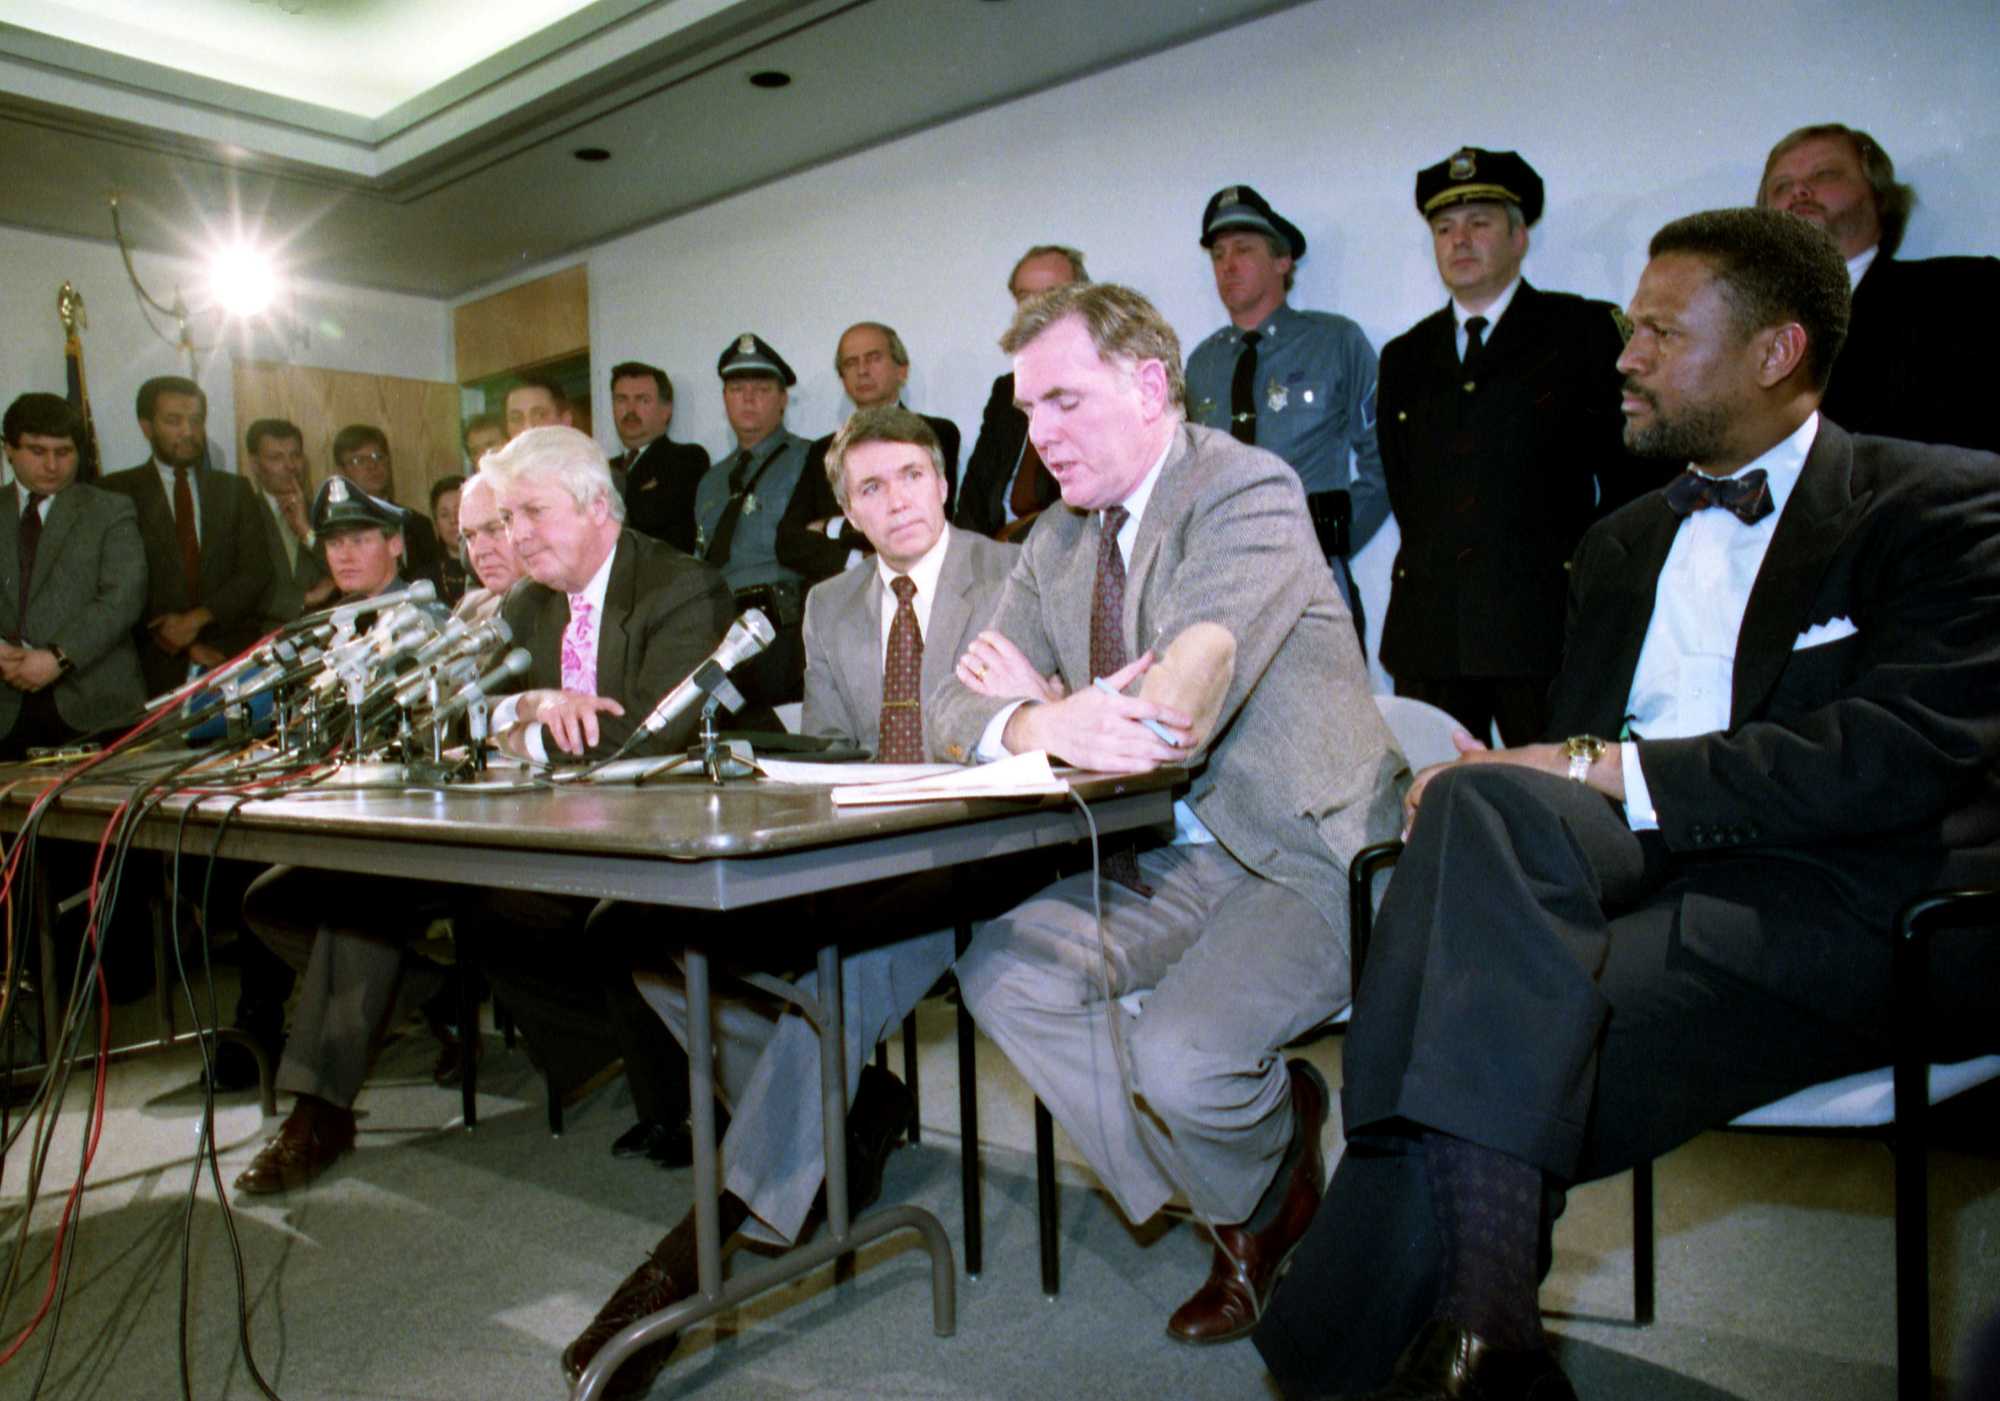 From left, District Attorney Newman Flanagan, Police Commissioner Francis Roache, and Boston Mayor Ray Flynn addressed the media at press conference following the suicide of Charles Stuart on Jan. 4, 1990.